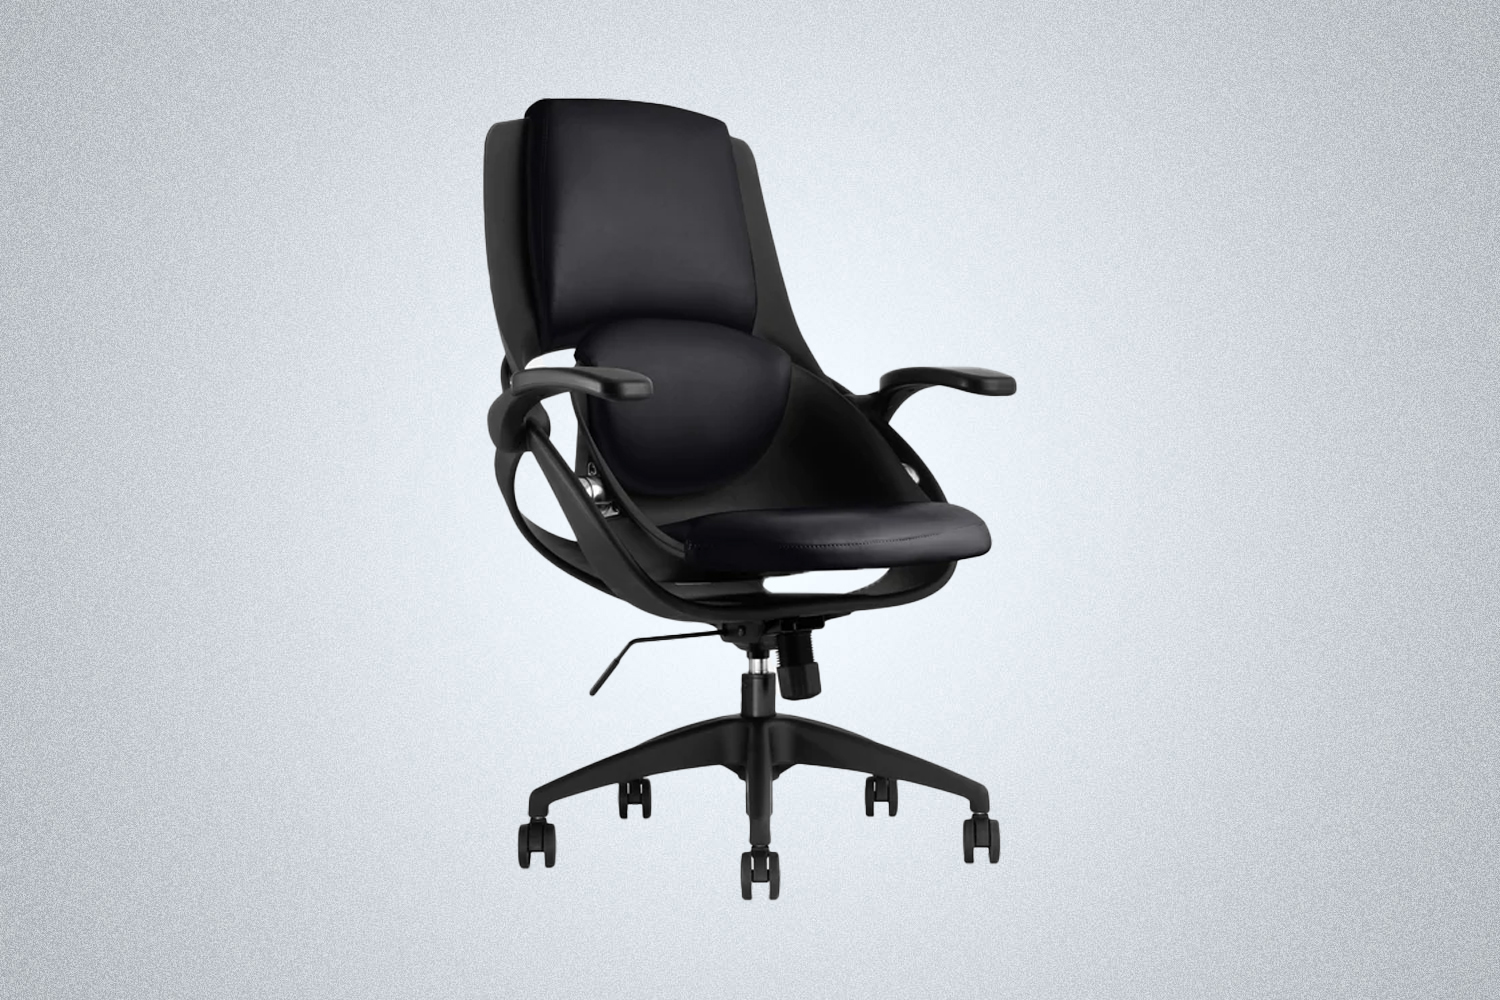 The All33 Backstrong Chair is the best luxury grad gift to buy in 2022